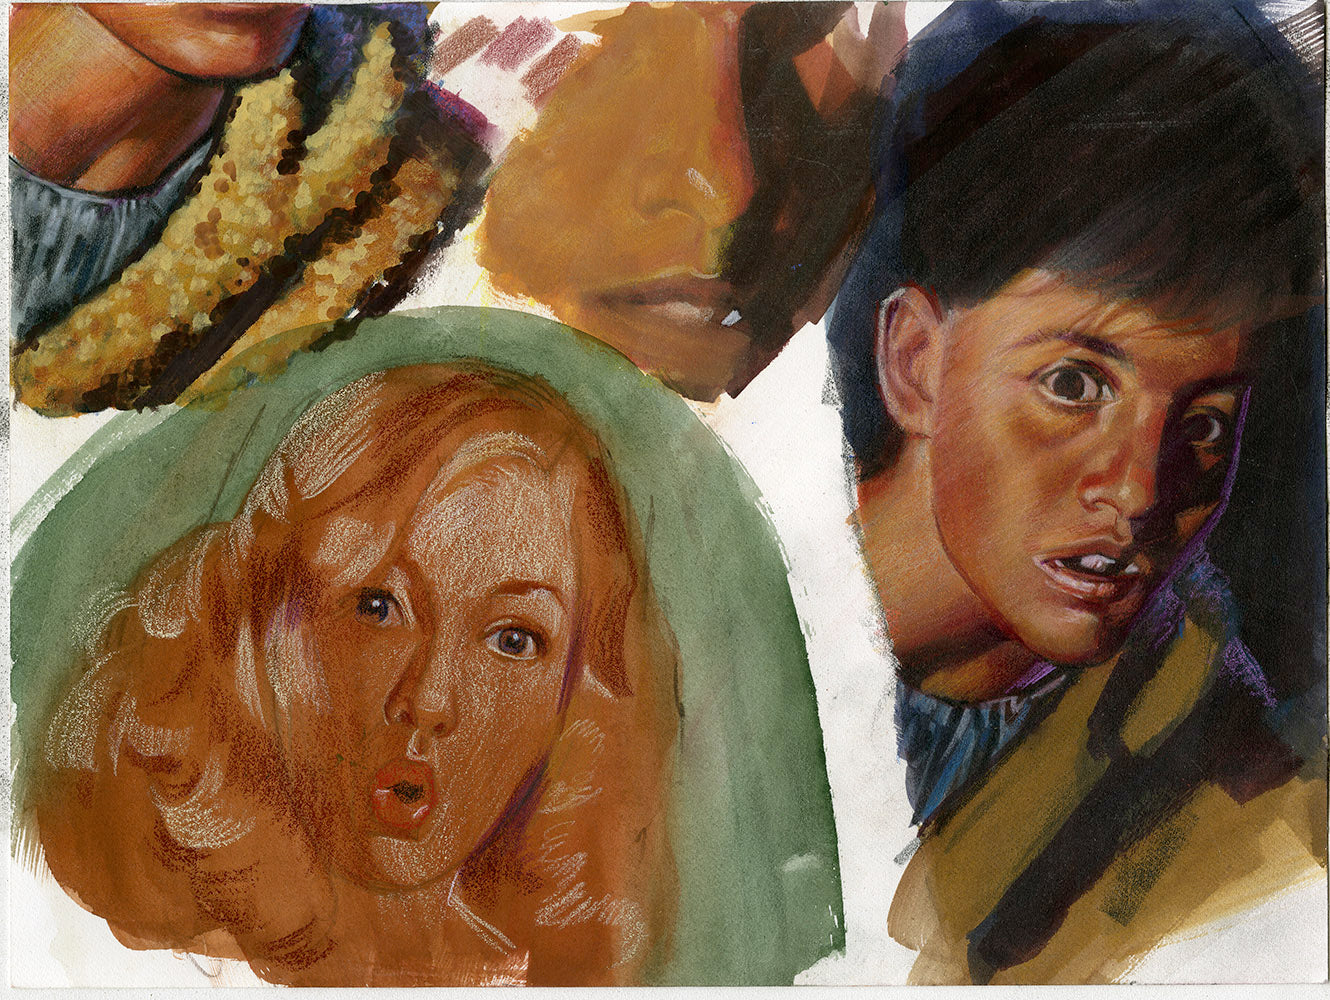 Surprised Faces Study Copies of Andrew Loomis (double sided)